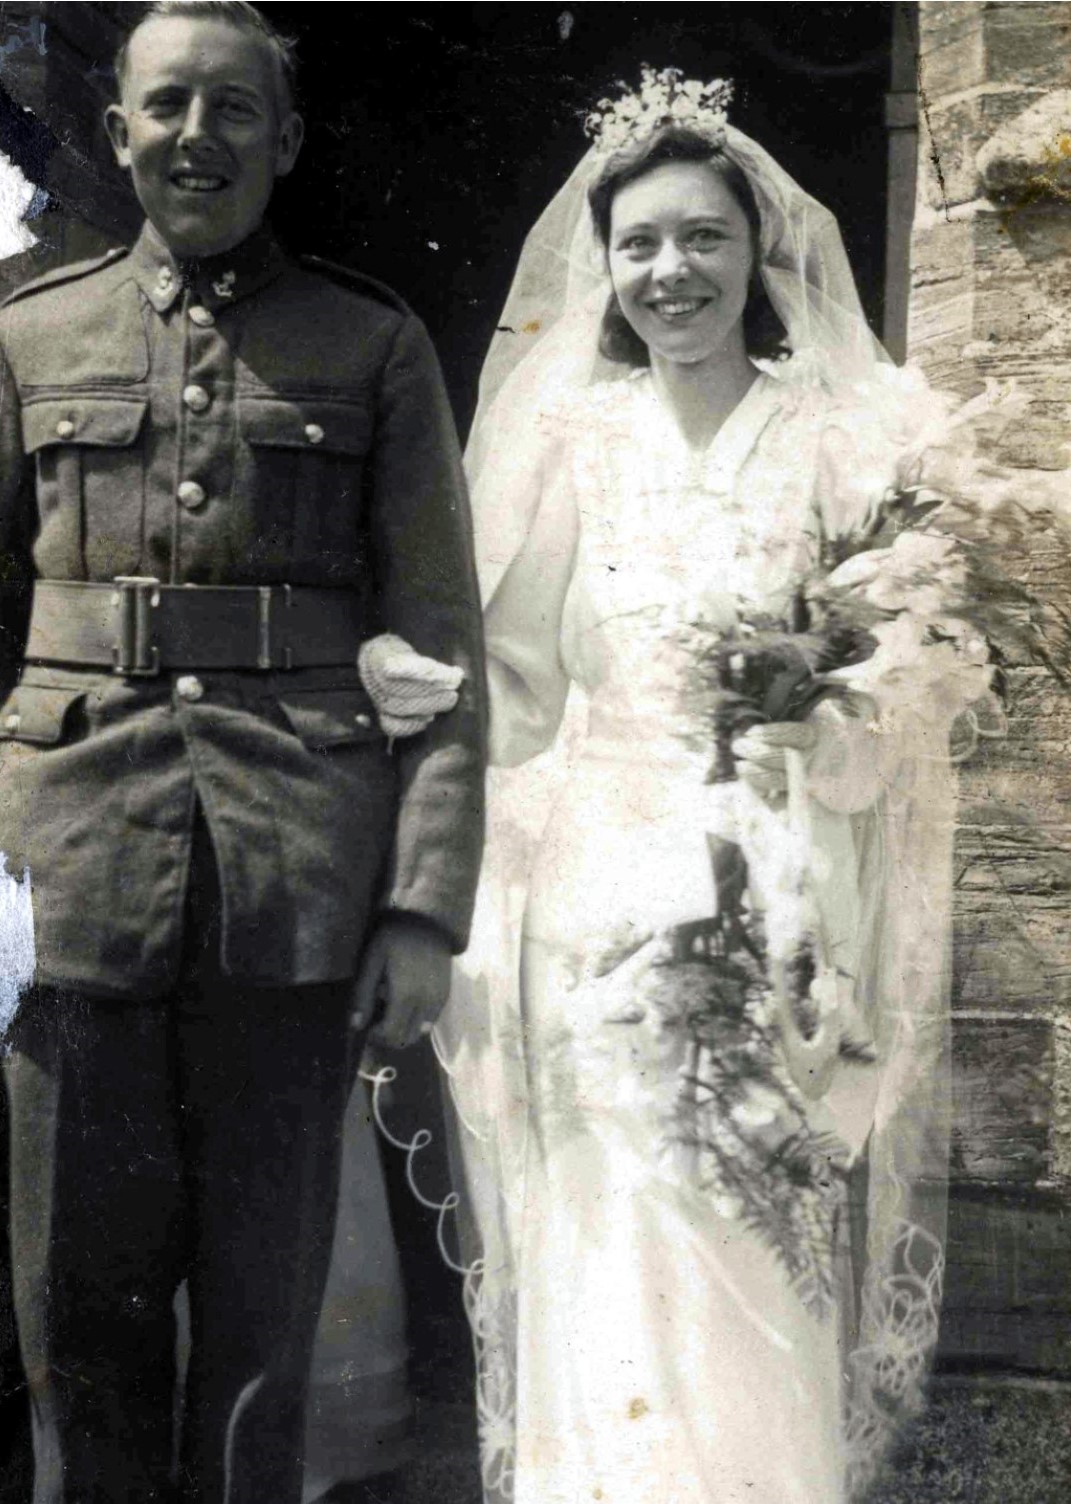 The wedding of Anne Leverton and Archie Lobb